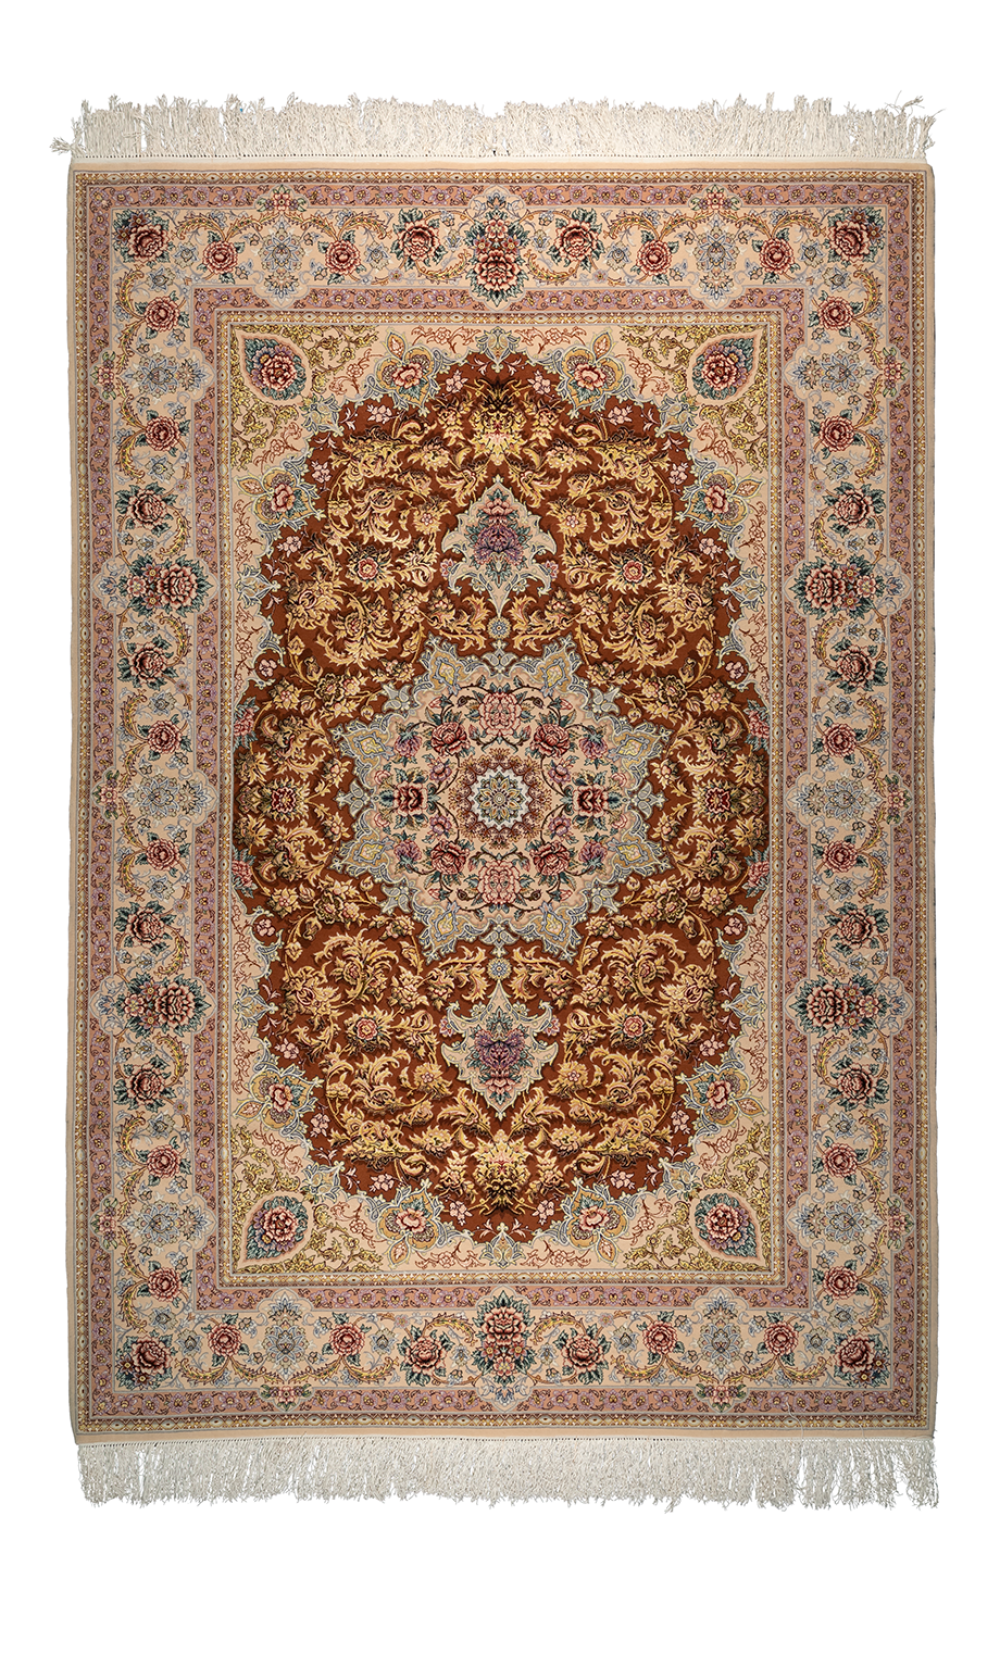 Finewool Brown Persian Rug Isfahan | Palmetto flower Pattern